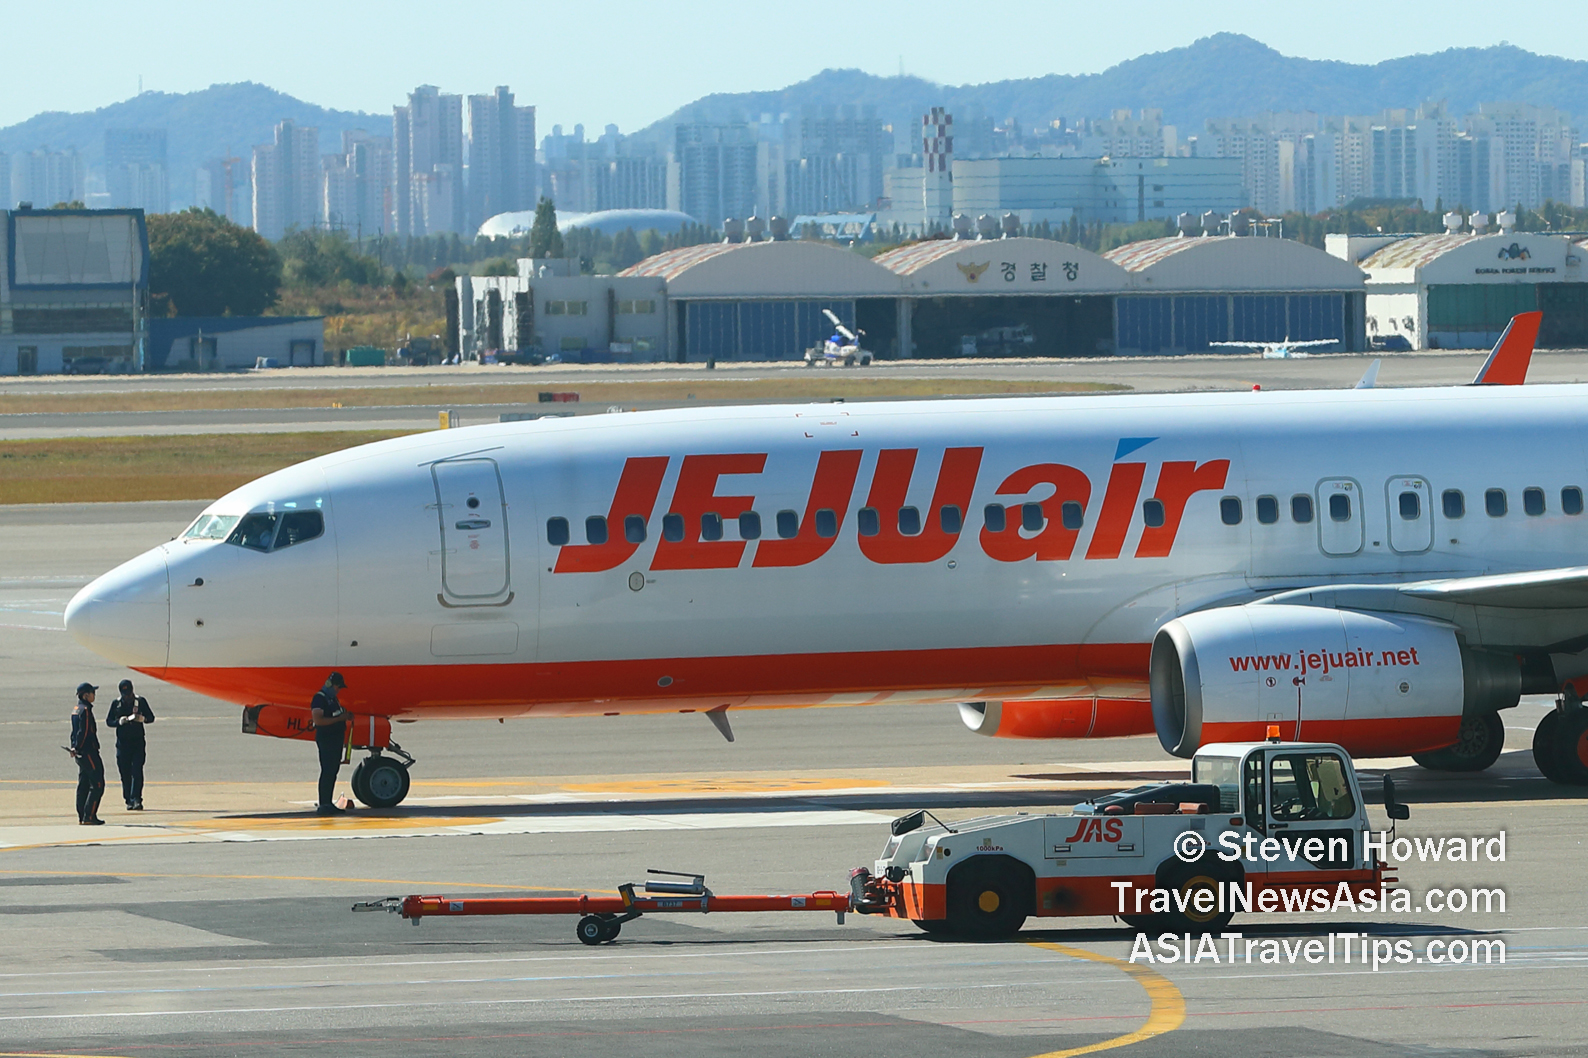 Jeju Air Boeing 737 reg: HL8061. Picture by Steven Howard of TravelNewsAsia.com Click to enlarge.